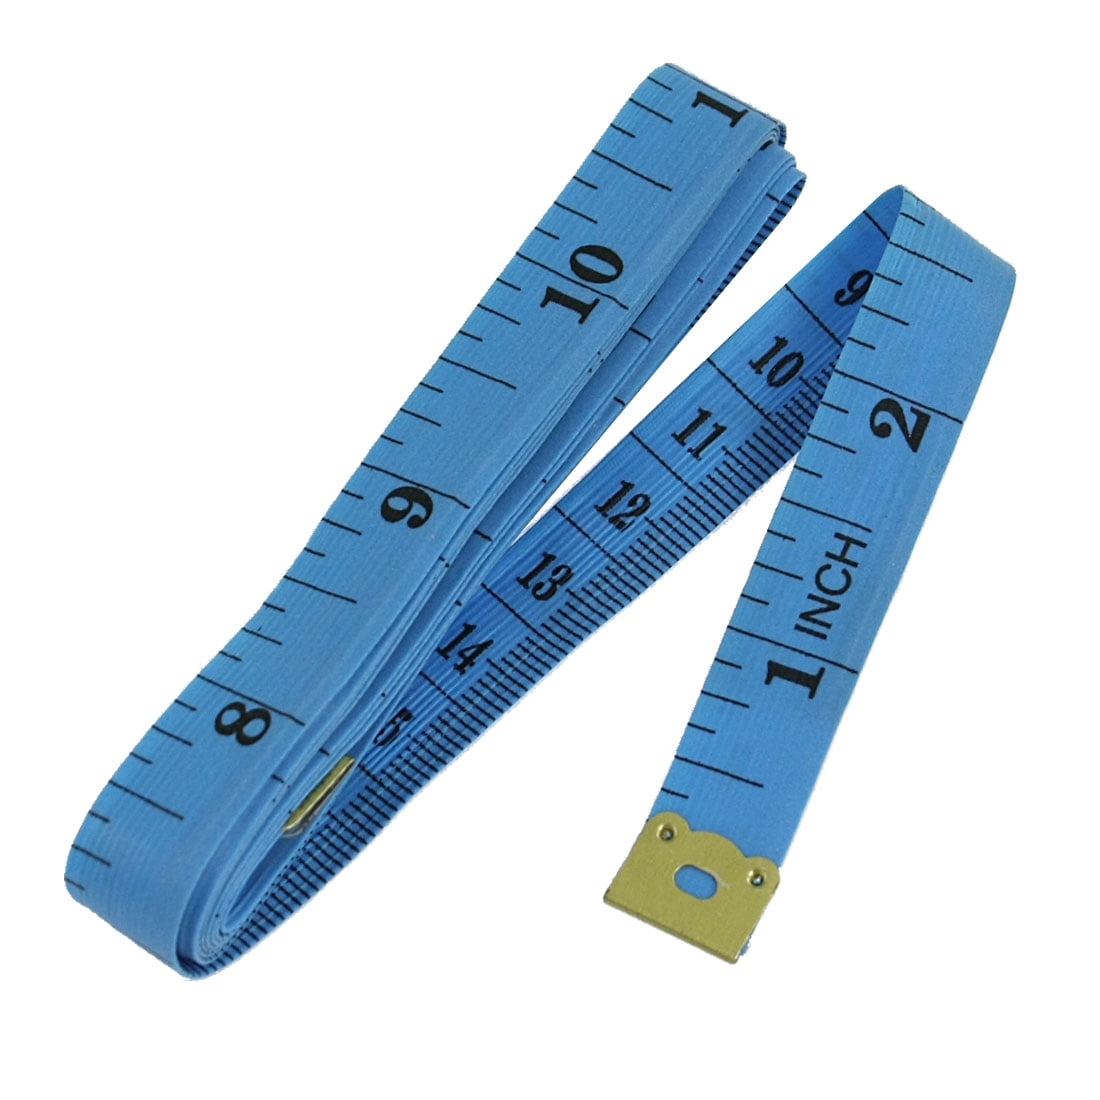 Details about   Measuring Tape 2pcs Body Soft Tape Fabric Tailor Retractable Measuring Tape 